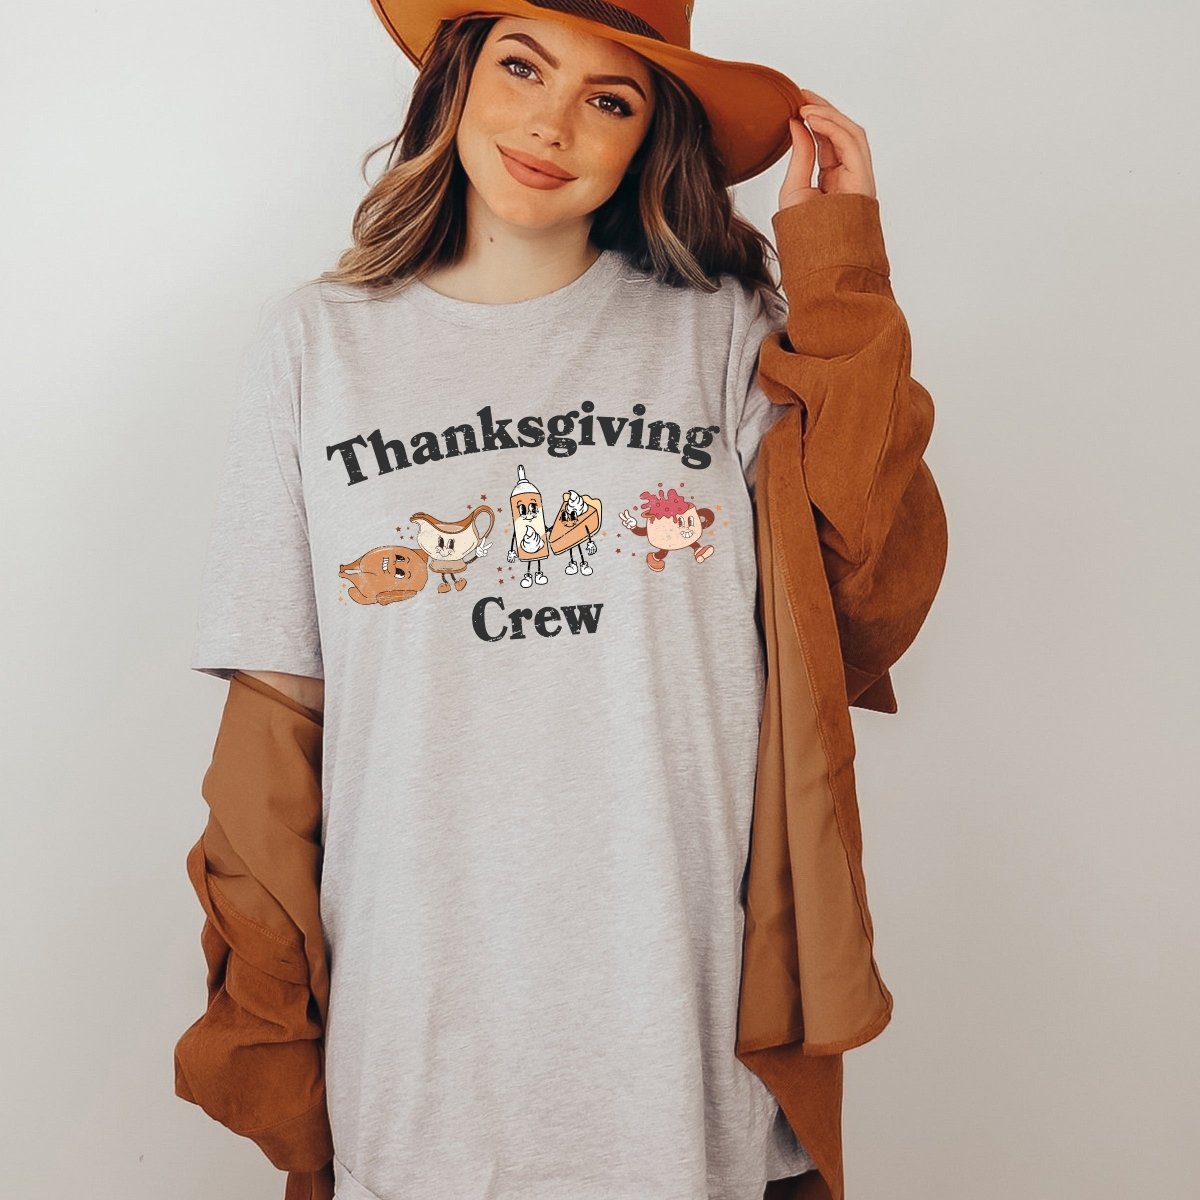 Thanksgiving Crew Characters Wholesale Tee - Limeberry Designs